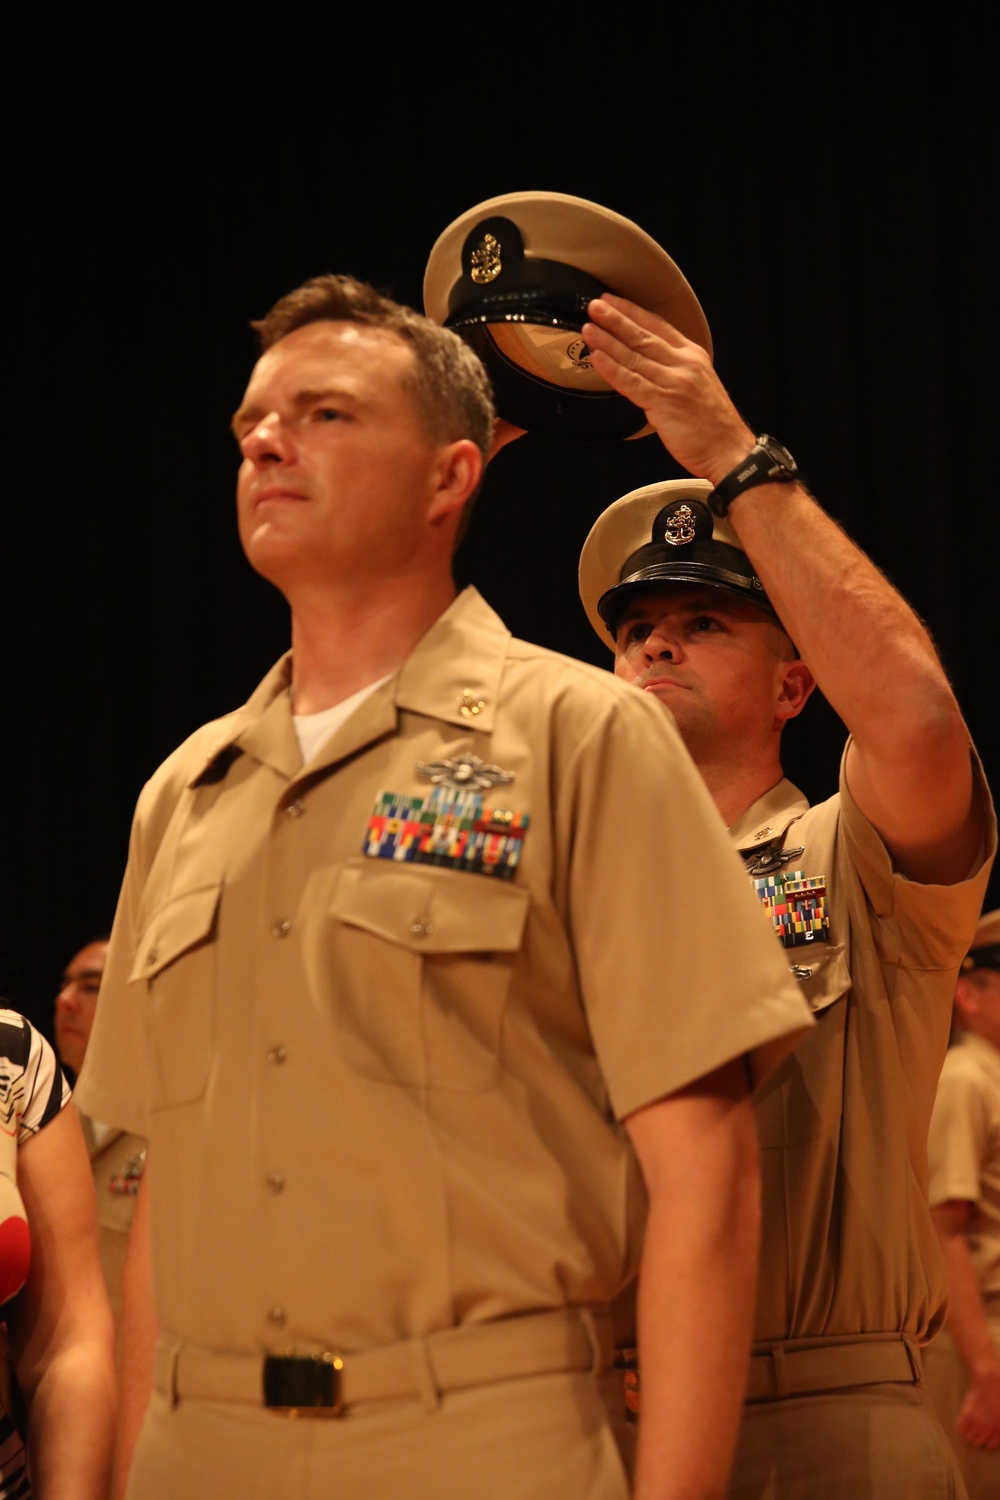 Sailors receive their anchors, come aboard as chiefs